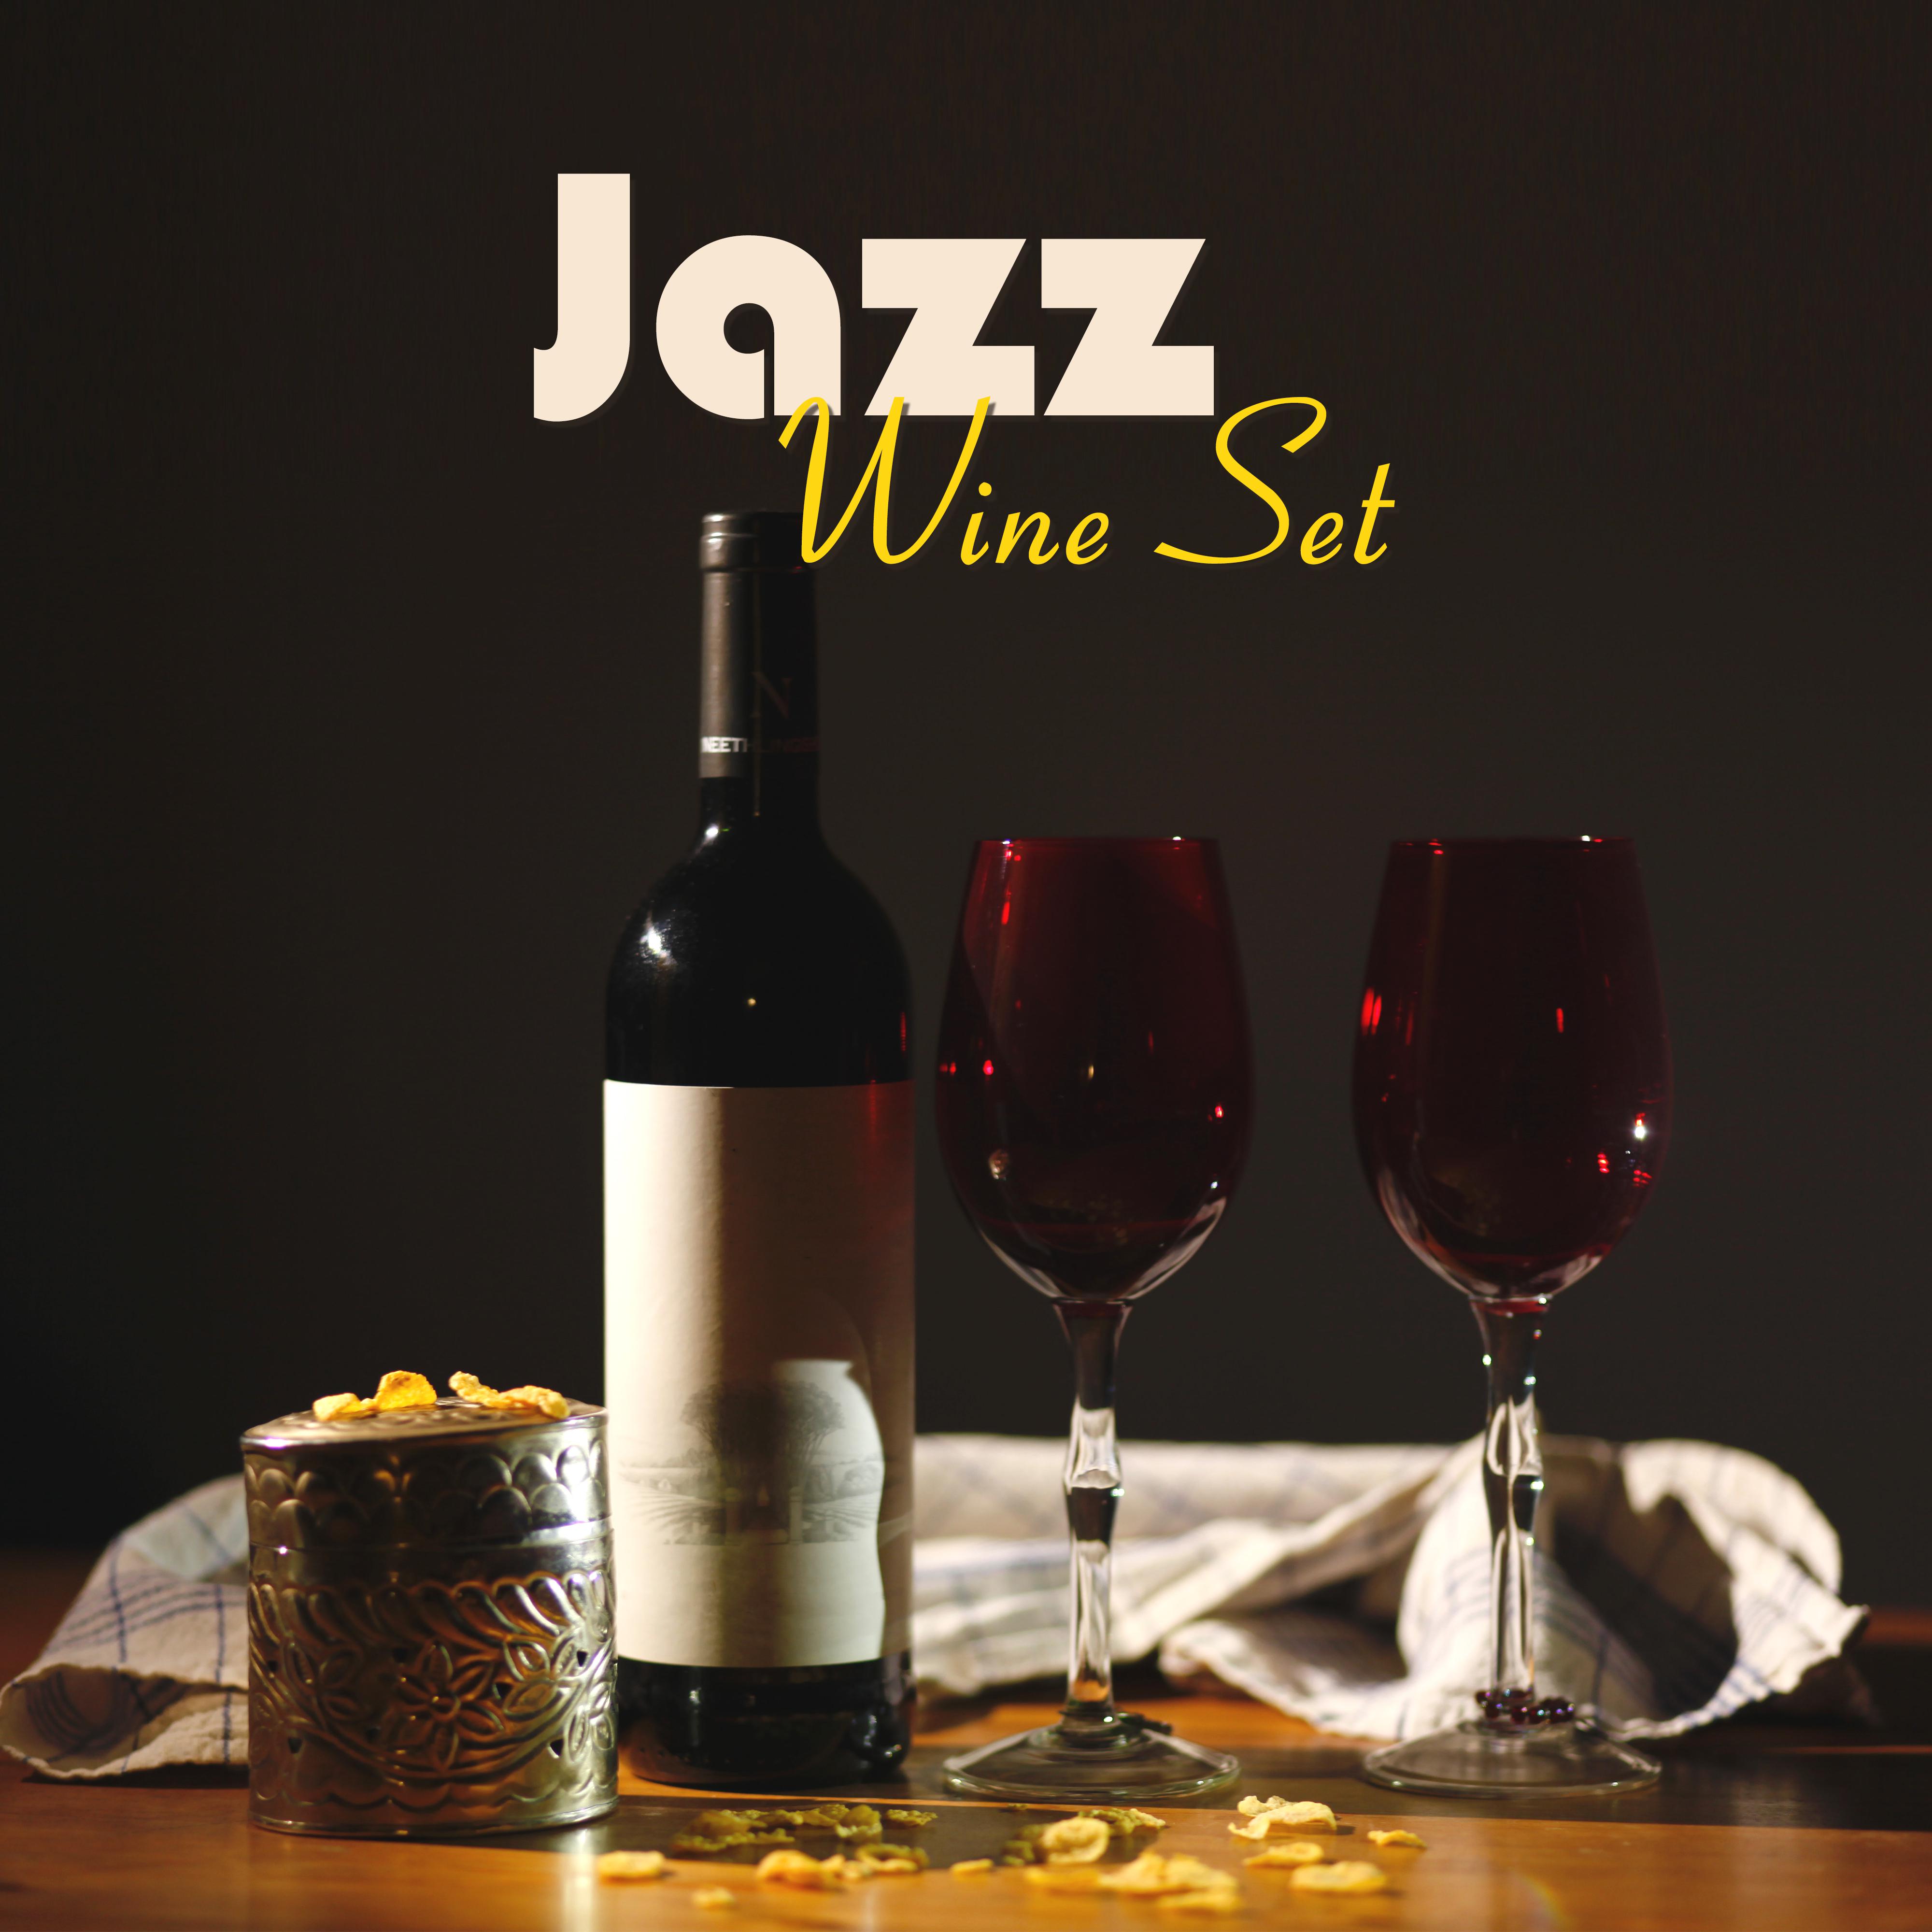 Jazz Wine Set: Finest Jazz for Wine Tasting, a Romantic Evening with a Glass of Wine, Exquisite Dinners or Simply to Relax and Rest